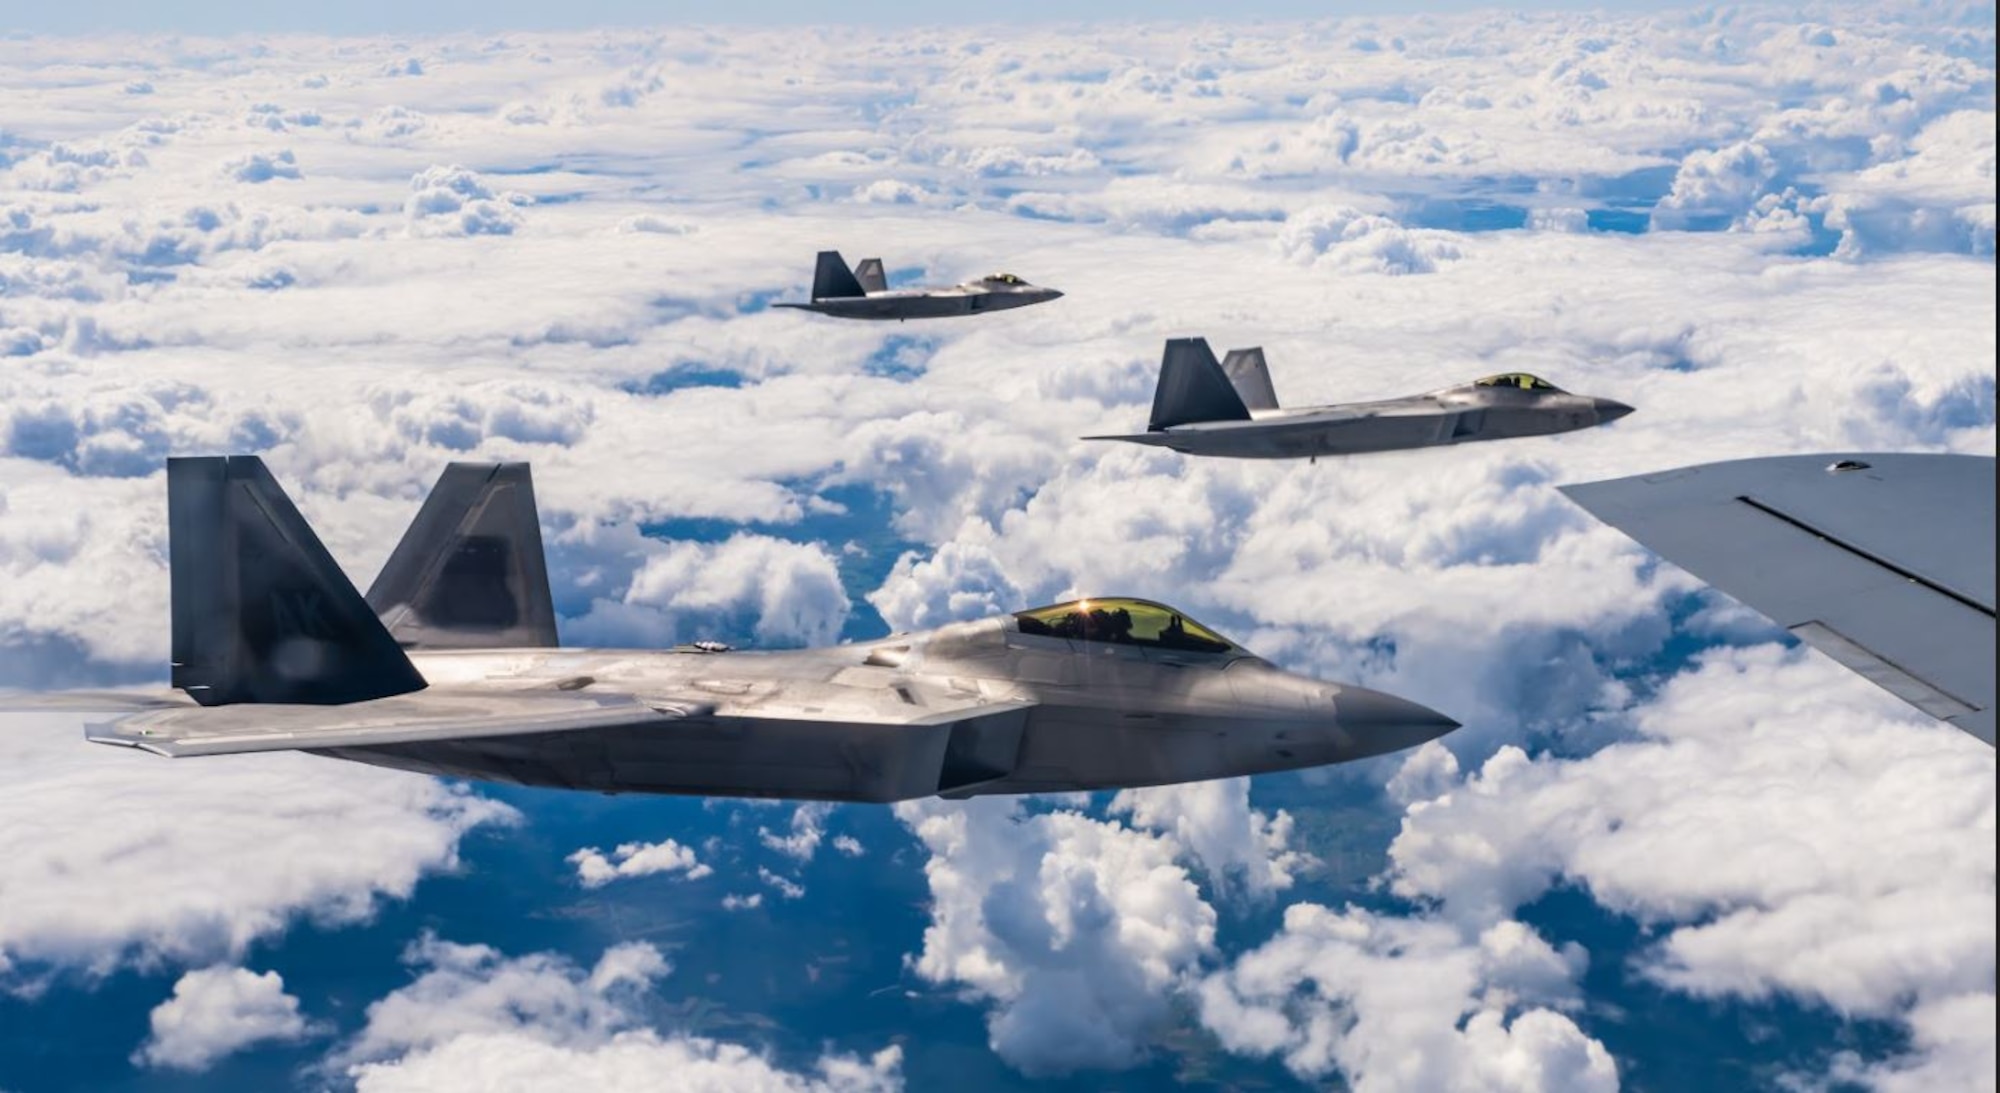 Three U.S. Air Force F-22 Raptor aircraft assigned to the 90th Fighter Squadron, Joint Base Elmendorf-Richardson, Alaska, fly alongside a U.S. Air Force KC-135 Stratotanker aircraft assigned to the 100th Air Refueling Wing at Royal Air Force Mildenhall, England, over Poland, Aug. 10, 2022. The F-22 possesses a sophisticated sensor suite allowing the pilot to track, identify, shoot and kill air-to-air threats before being detected. It cannot be matched by any known or projected fighter aircraft, making it a highly strategic platform to support NATO Air Shielding. (U.S. Air Force photo by Staff Sgt. Kevin Long)